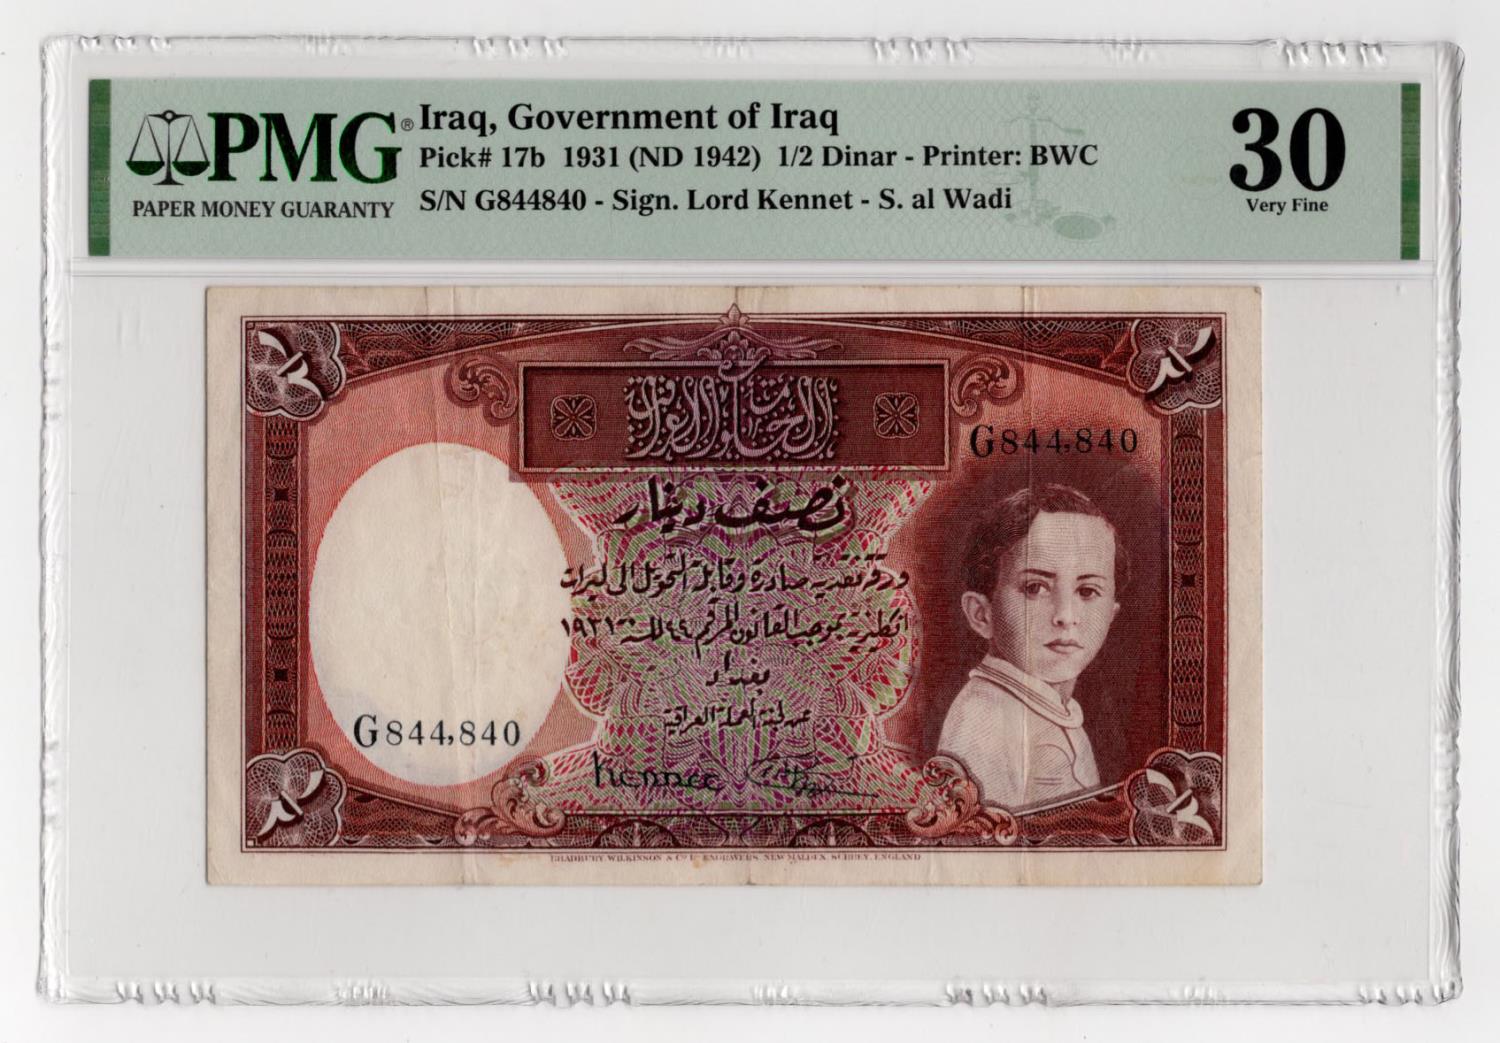 Iraq 1/2 Dinar issued 1942 (Law of 1931), portrait King Faisal II as a child at right, signed Kennet